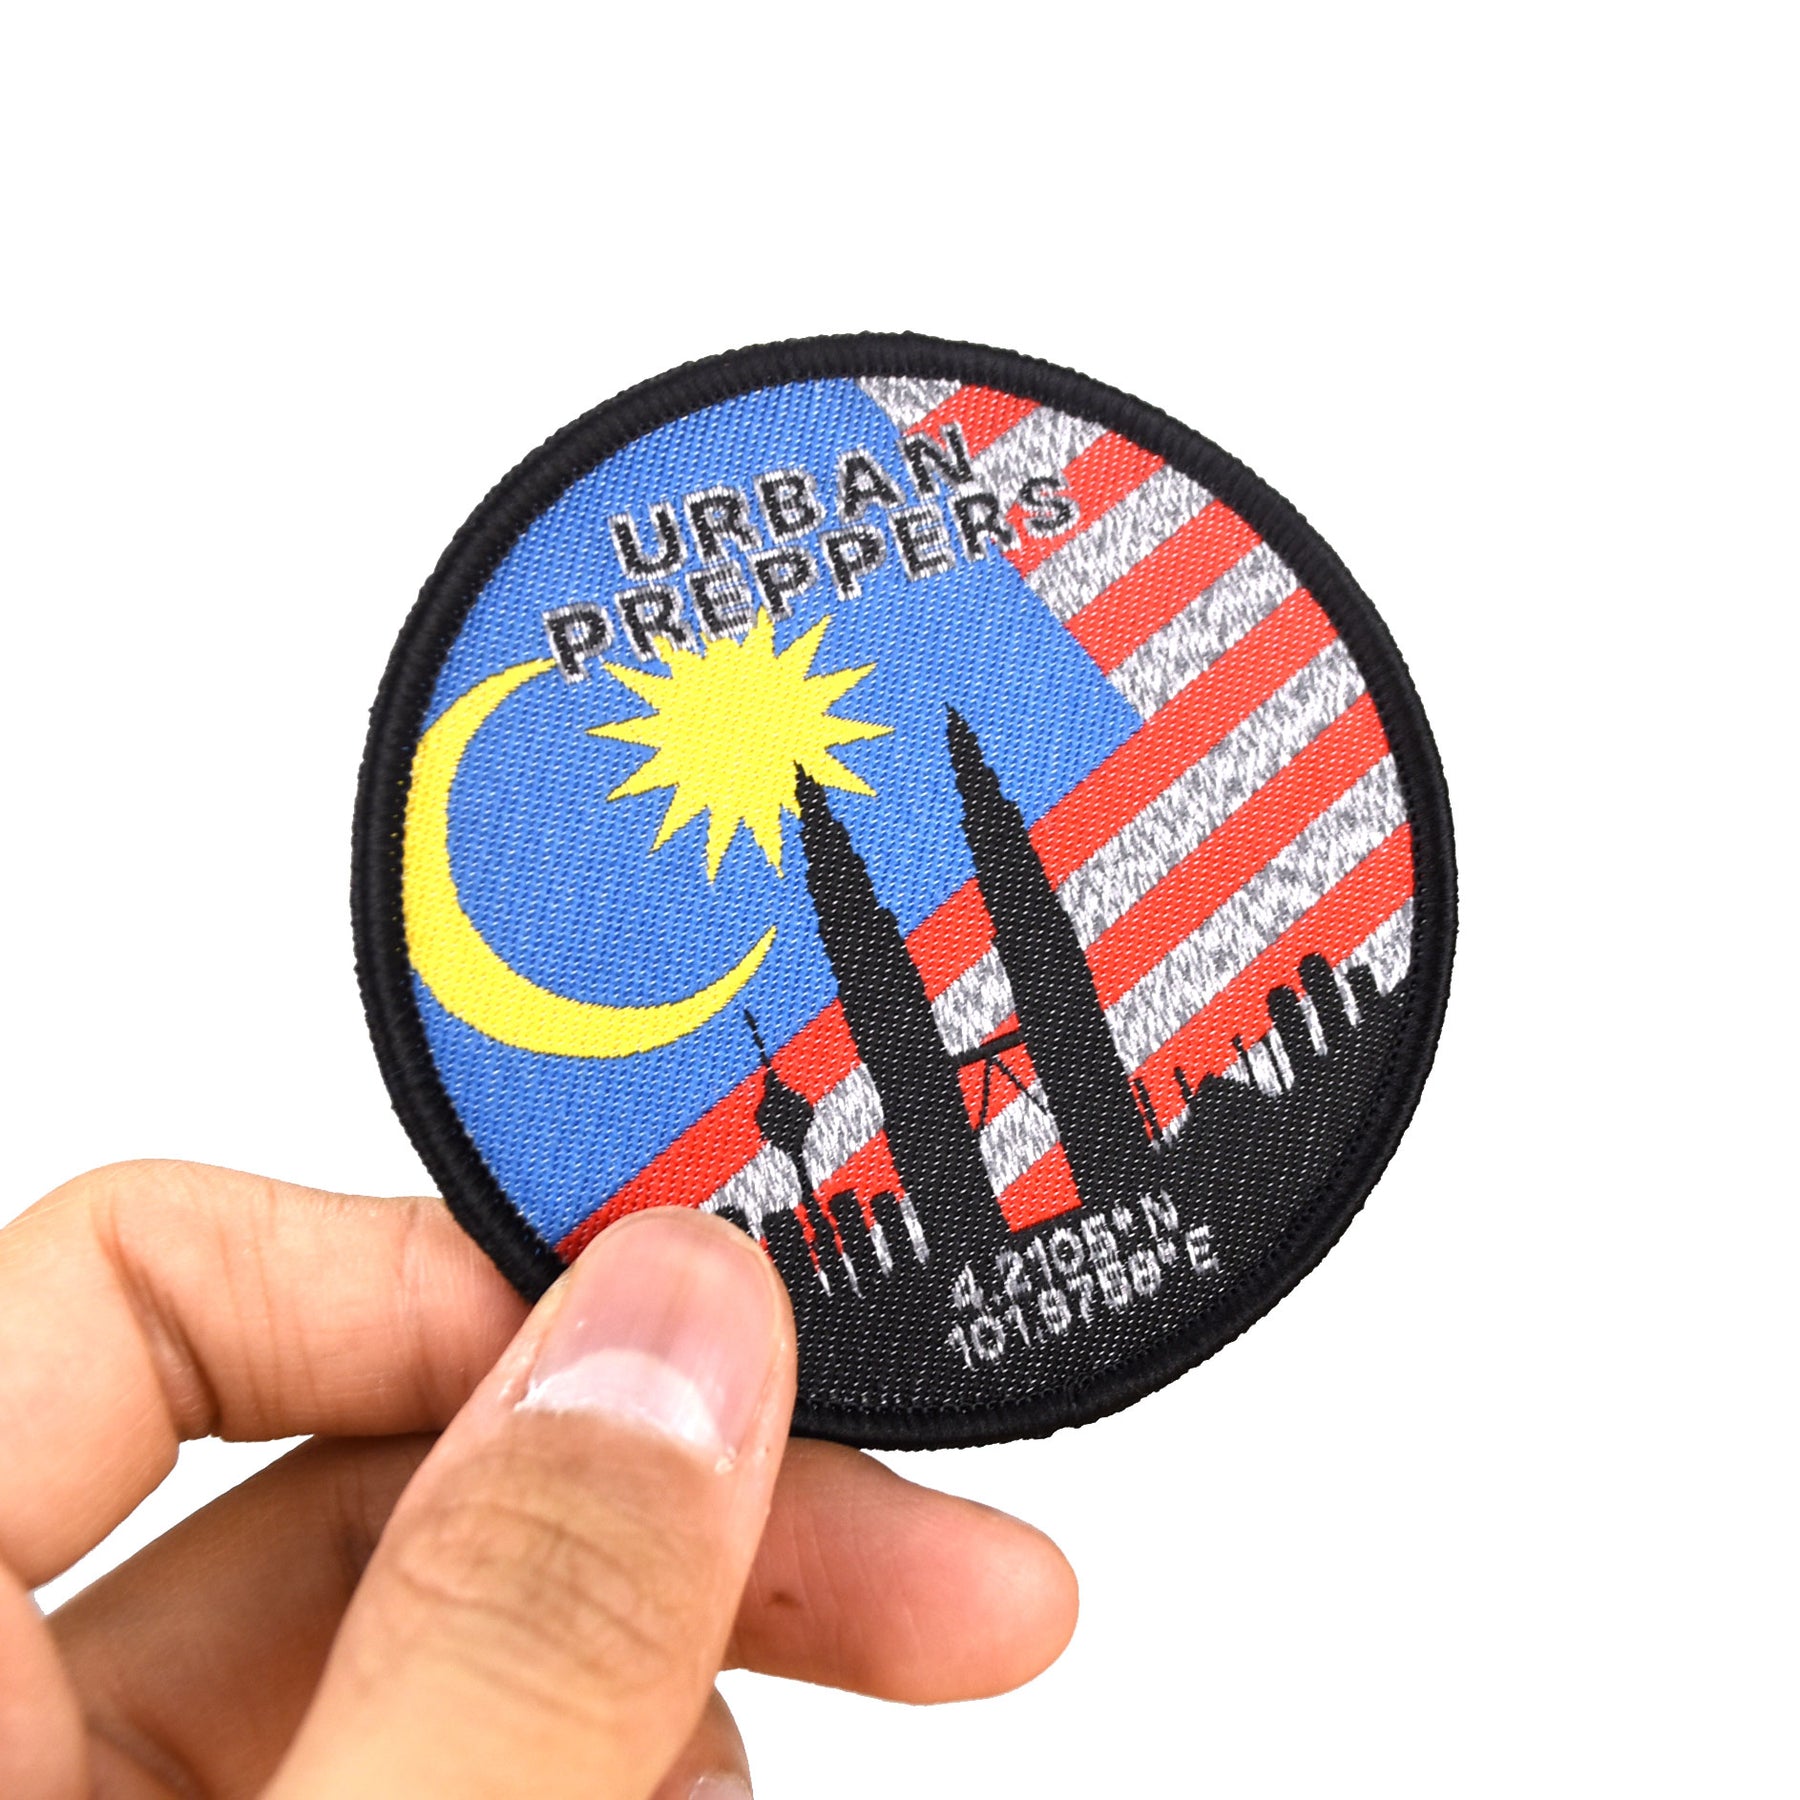 Urban Preppers UPMY 2023 Reflective Patch (Limited Edition)